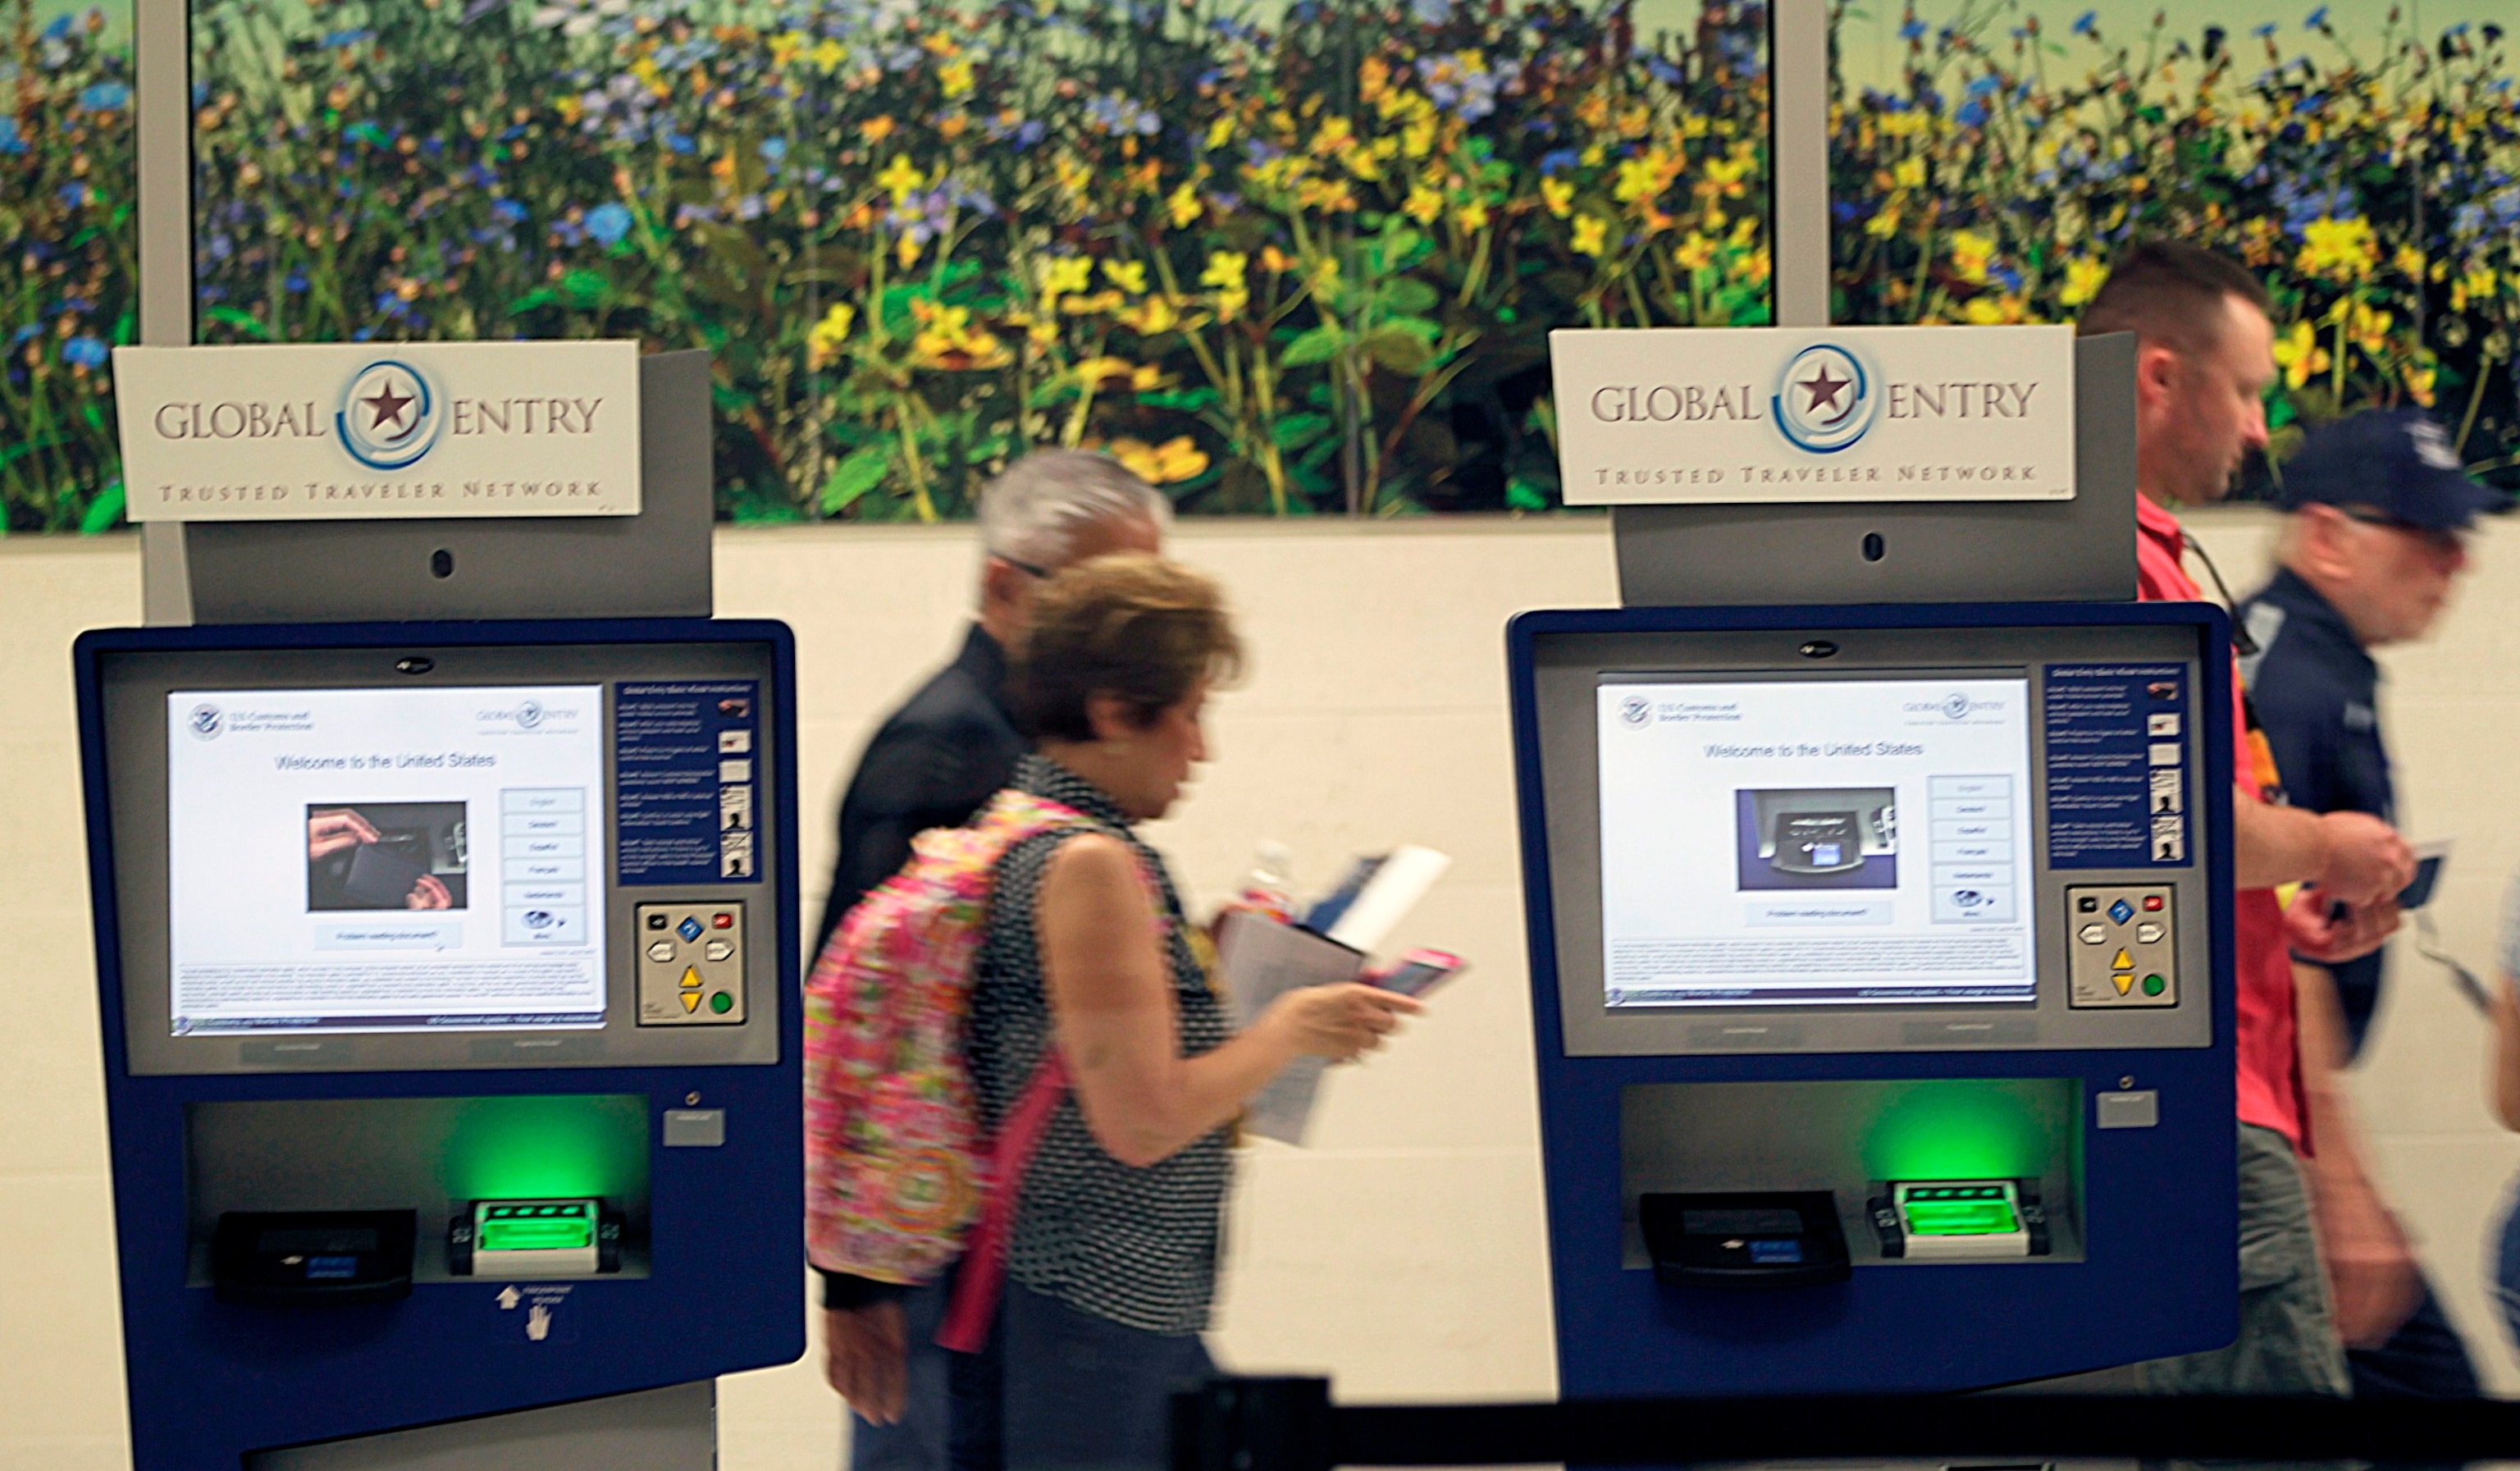 PHOTO: In this Sept. 19, 2015 file photo, volunteers walk past Global Entry Trusted Traveler Network terminals during testing of processes  at Hobby Airport's international concourse in Houston.